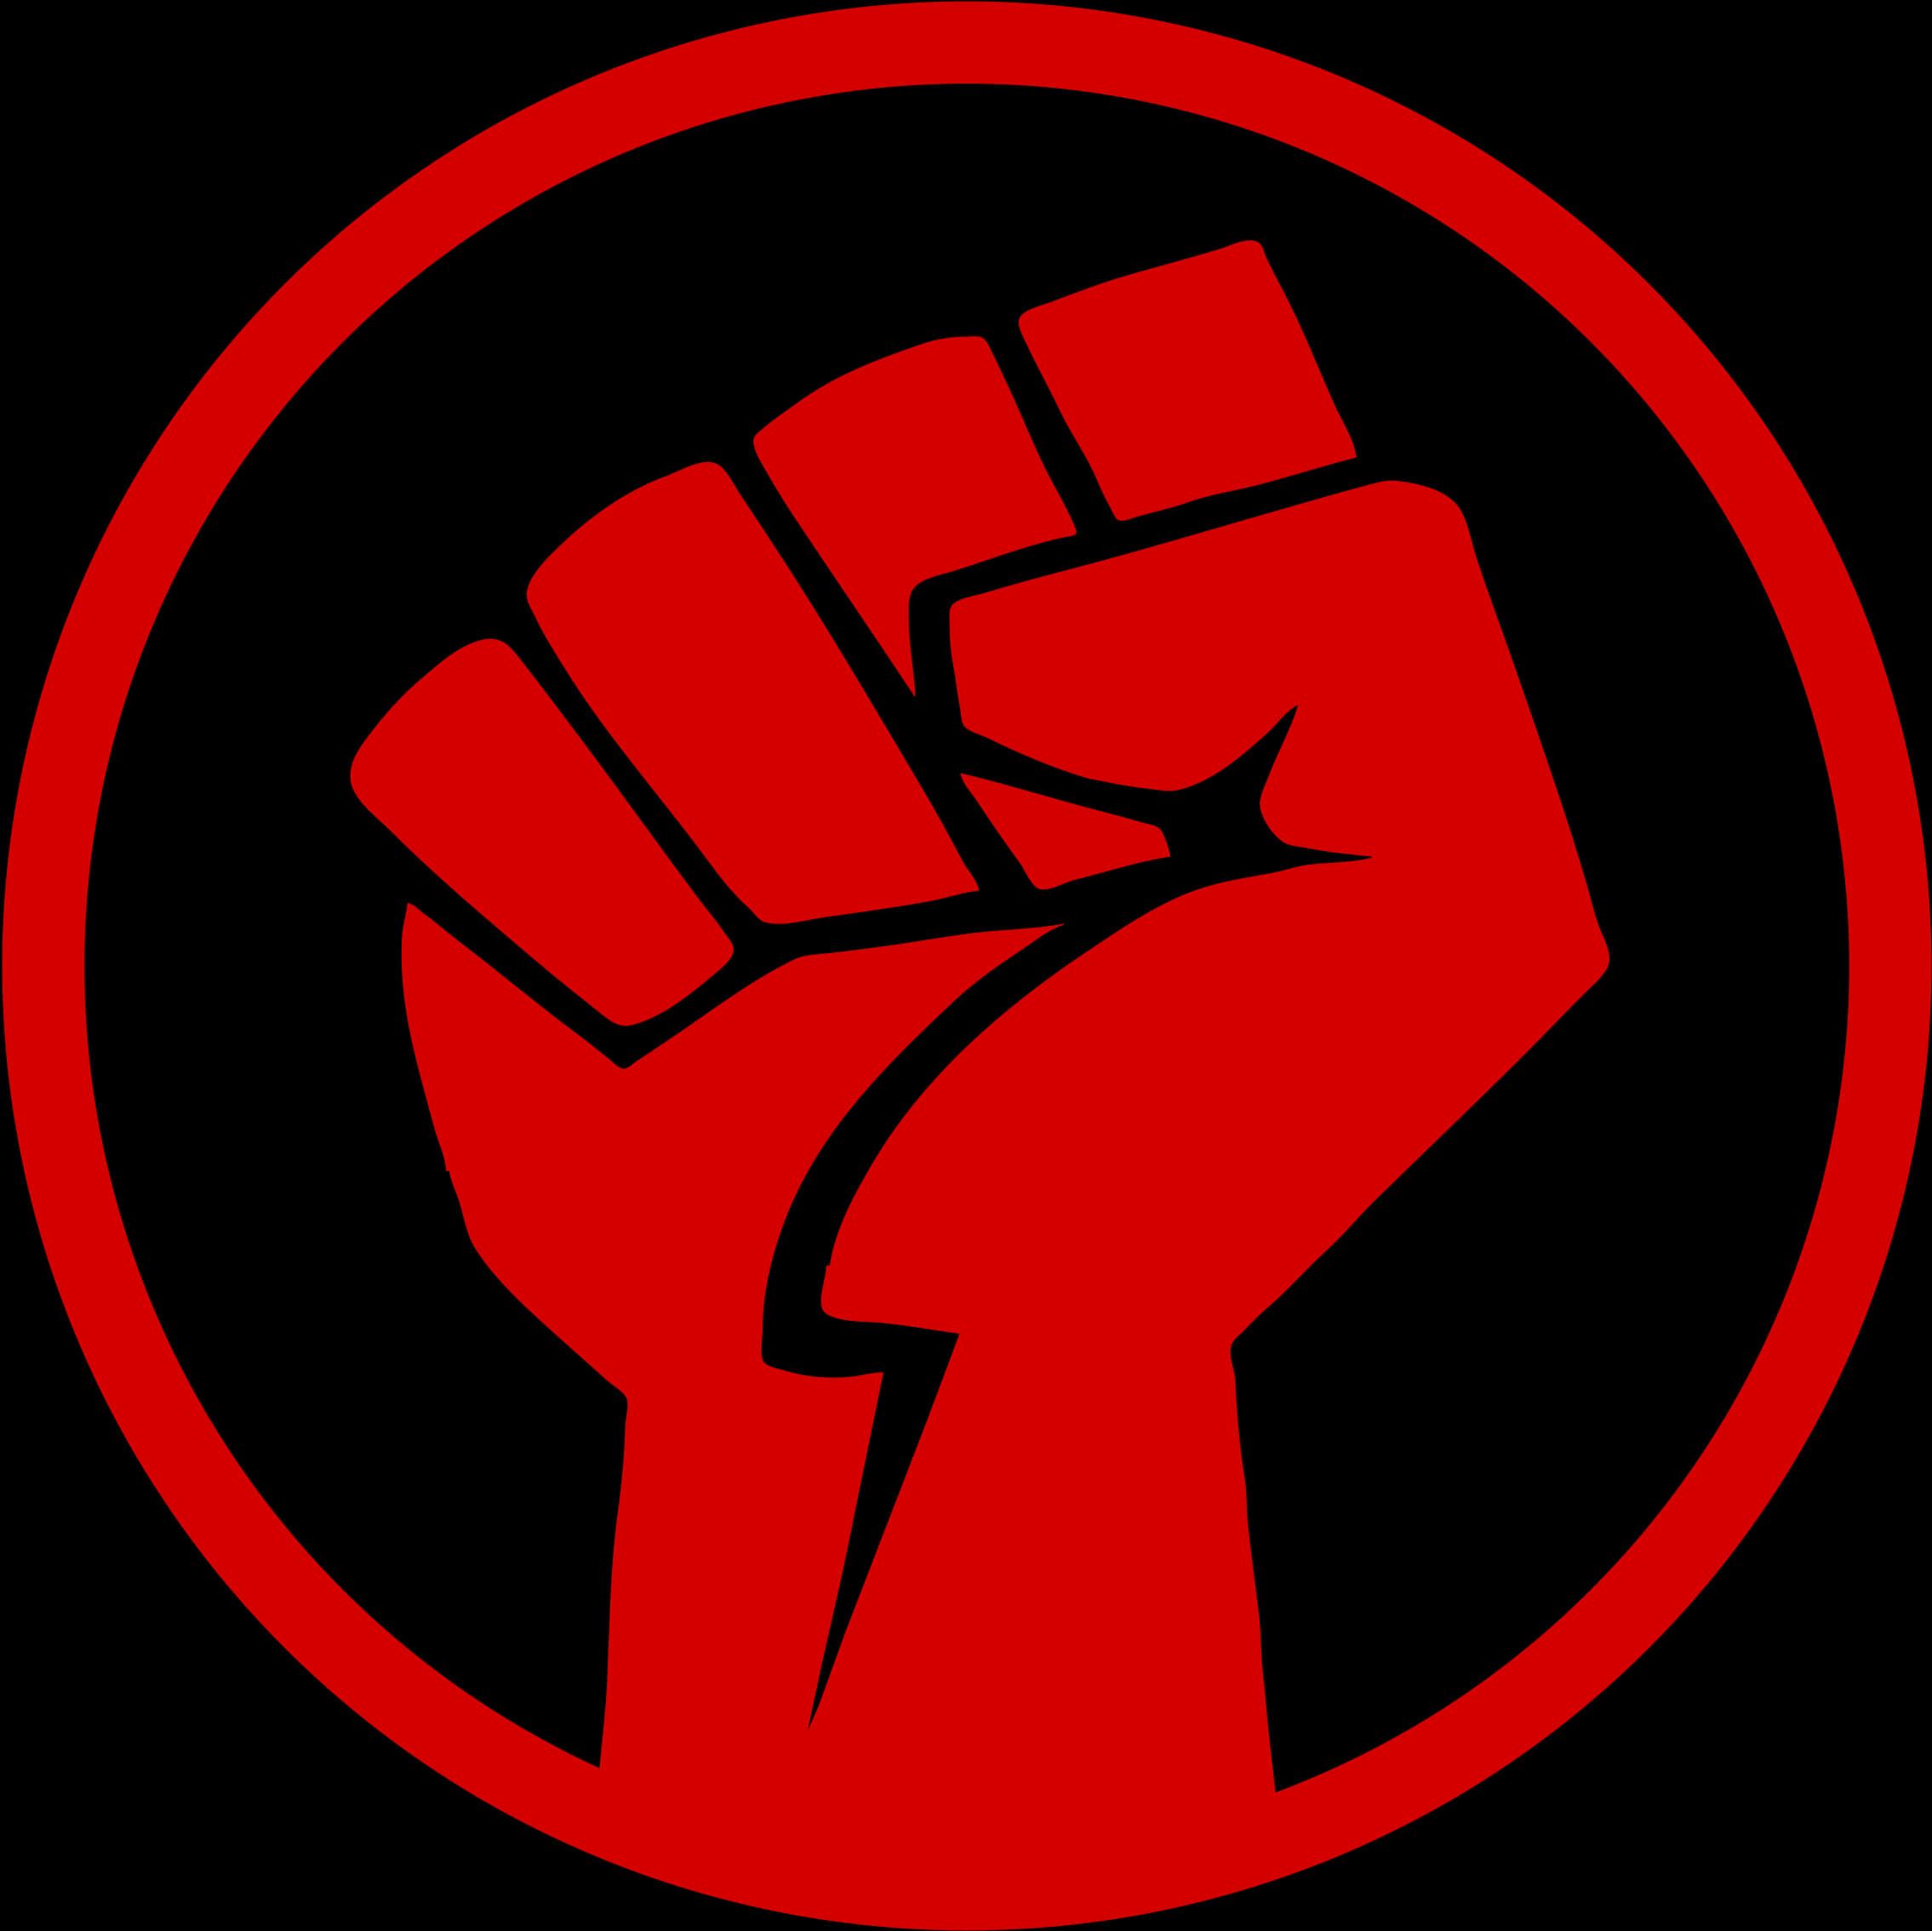 A Red And Black Symbol With A Fist In The Middle